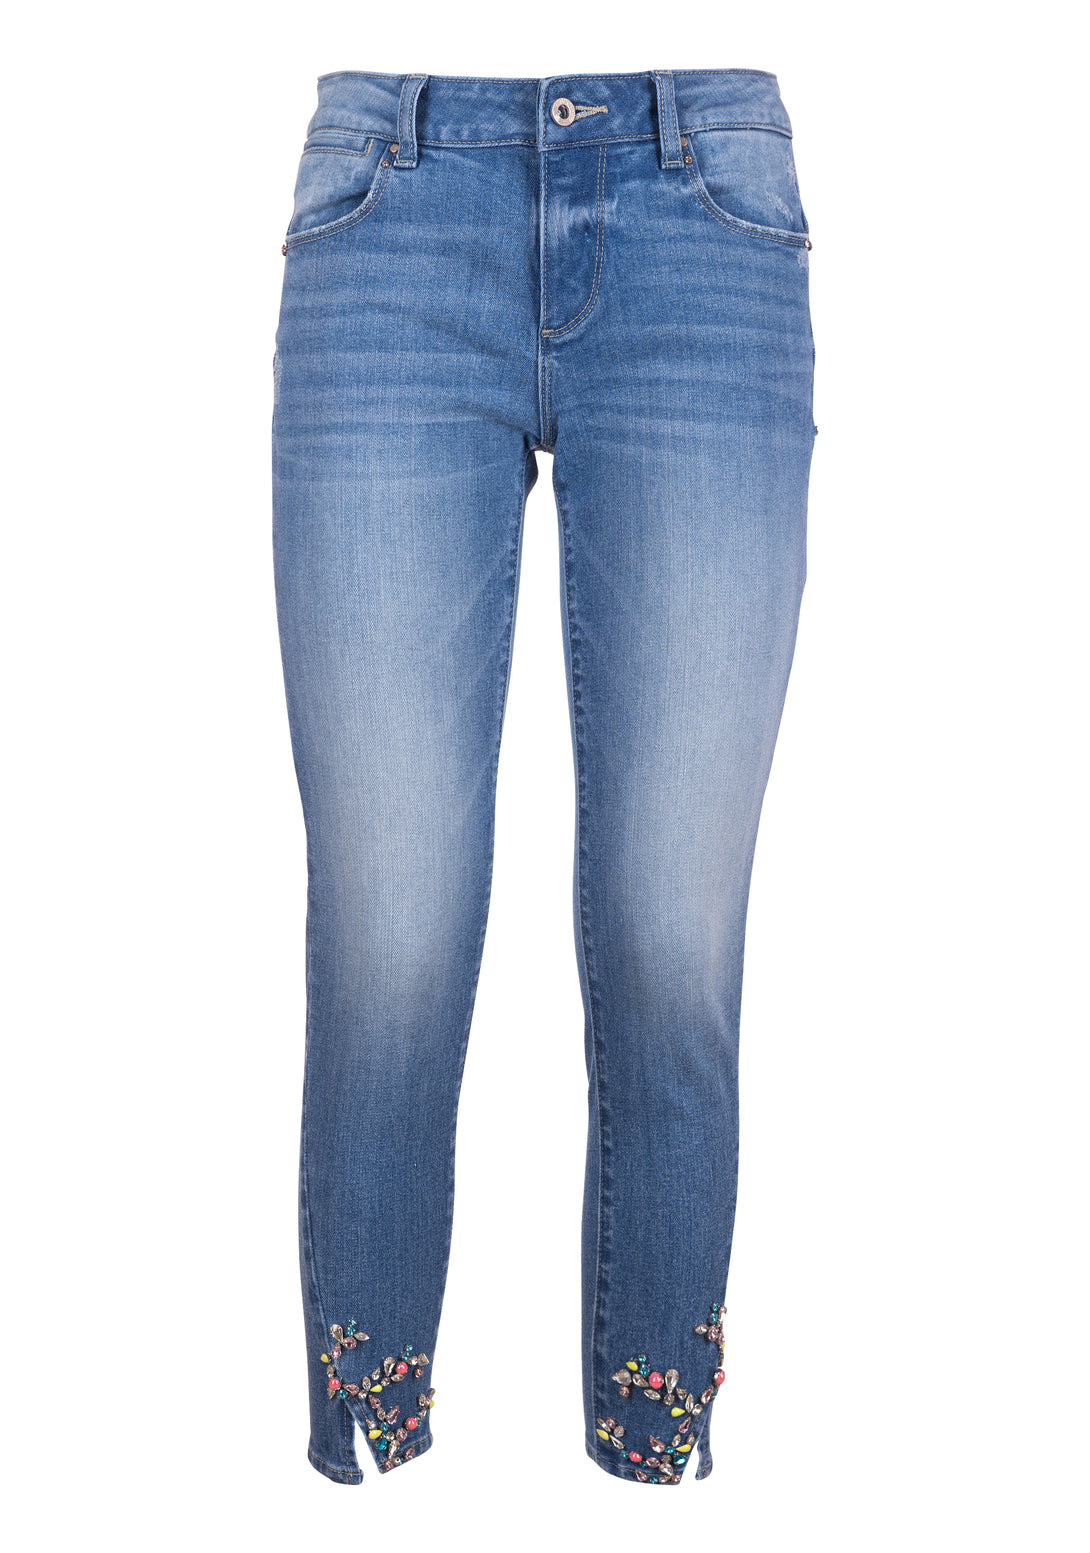 Jeans slim fit made in denim with light wash